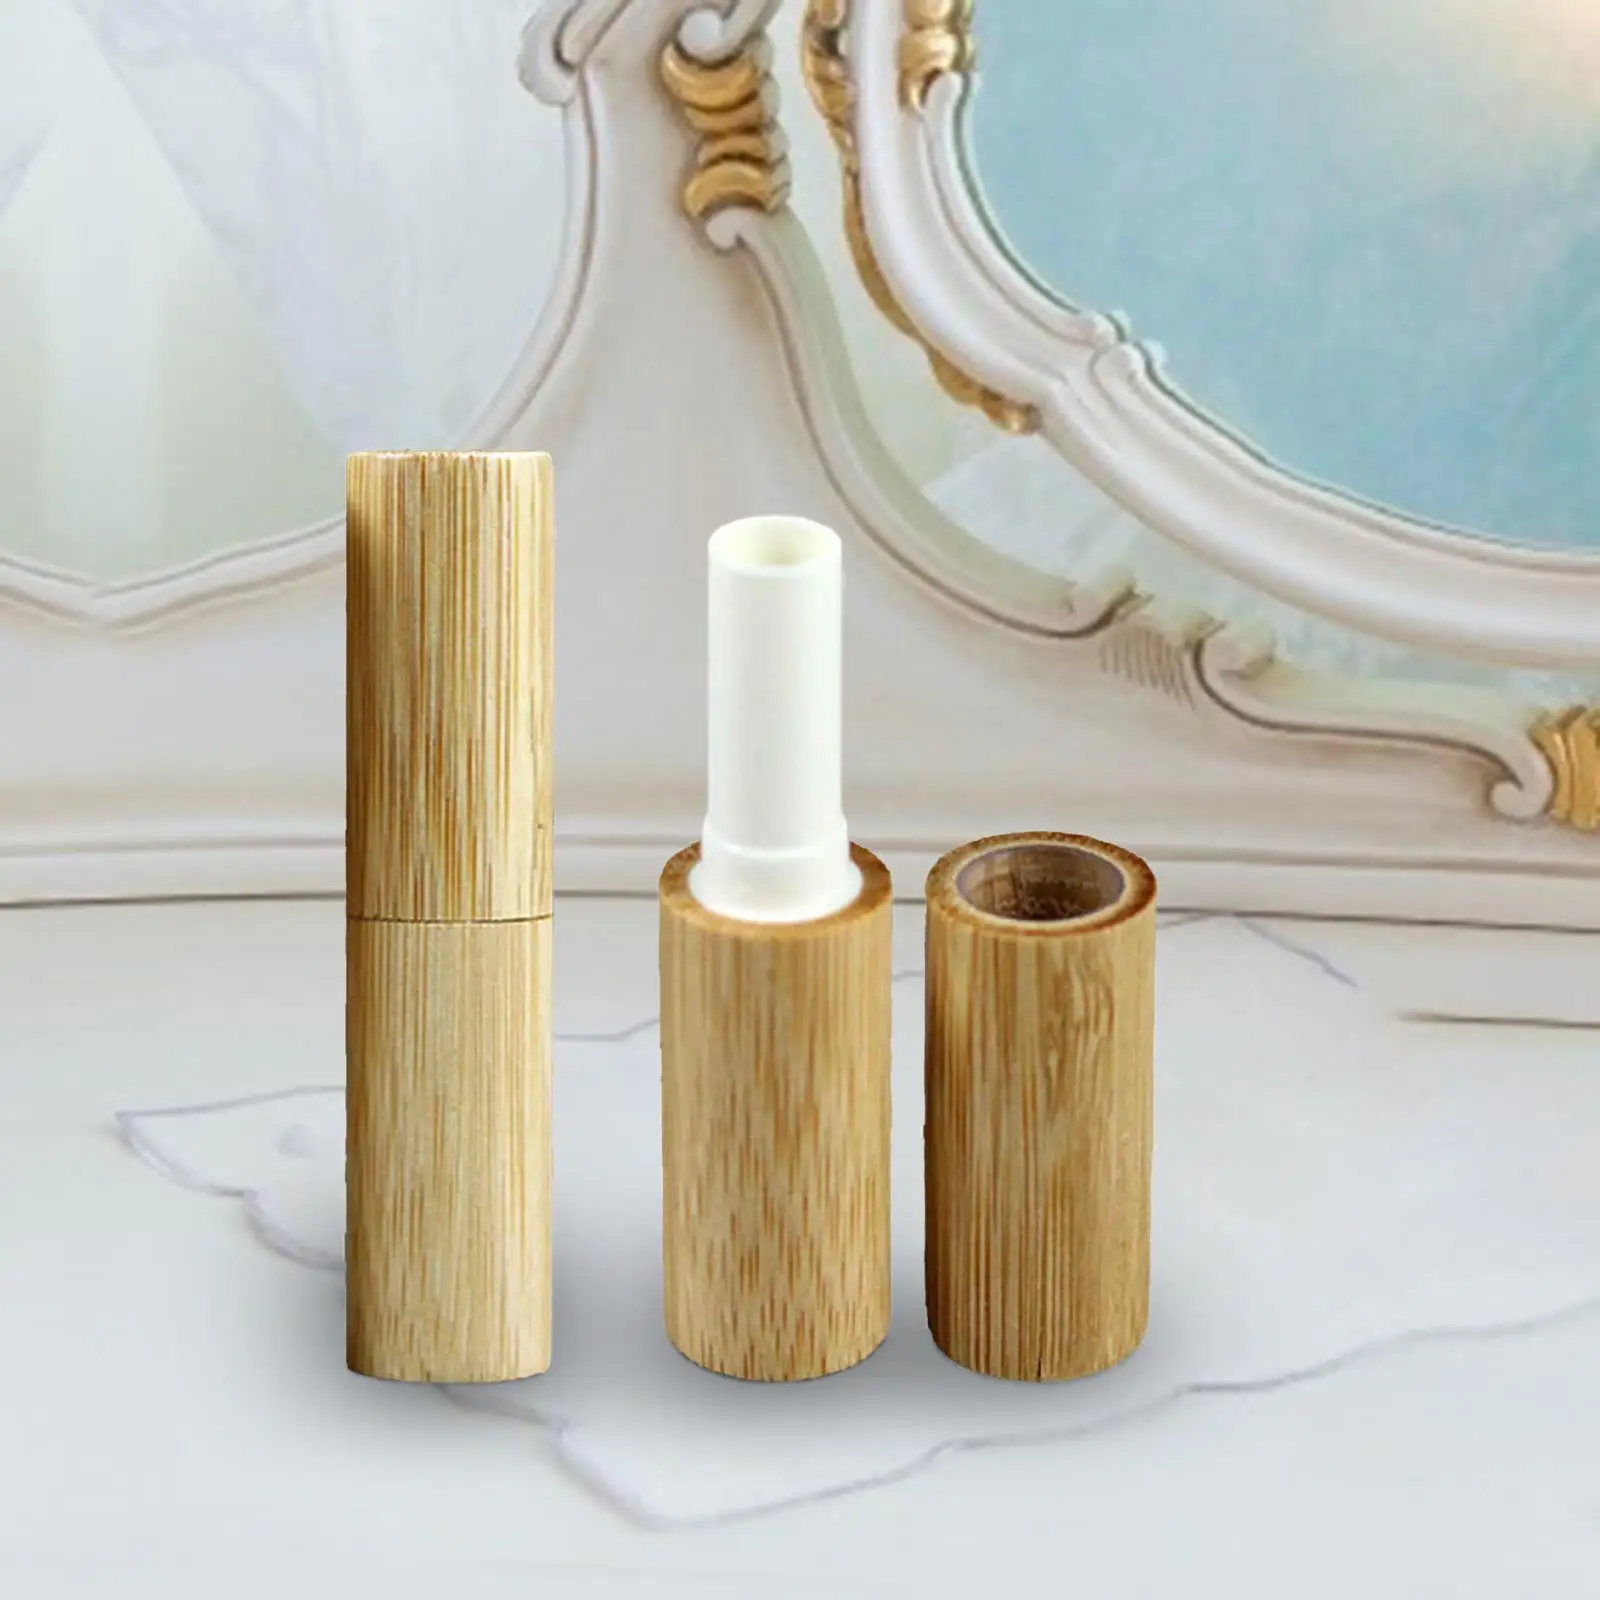 2x Lip Glosses Tubes Containers Empty Bamboo Shell Cosmetic Bottles Samples Lip Oils Tubes for Homemade Lip Balms